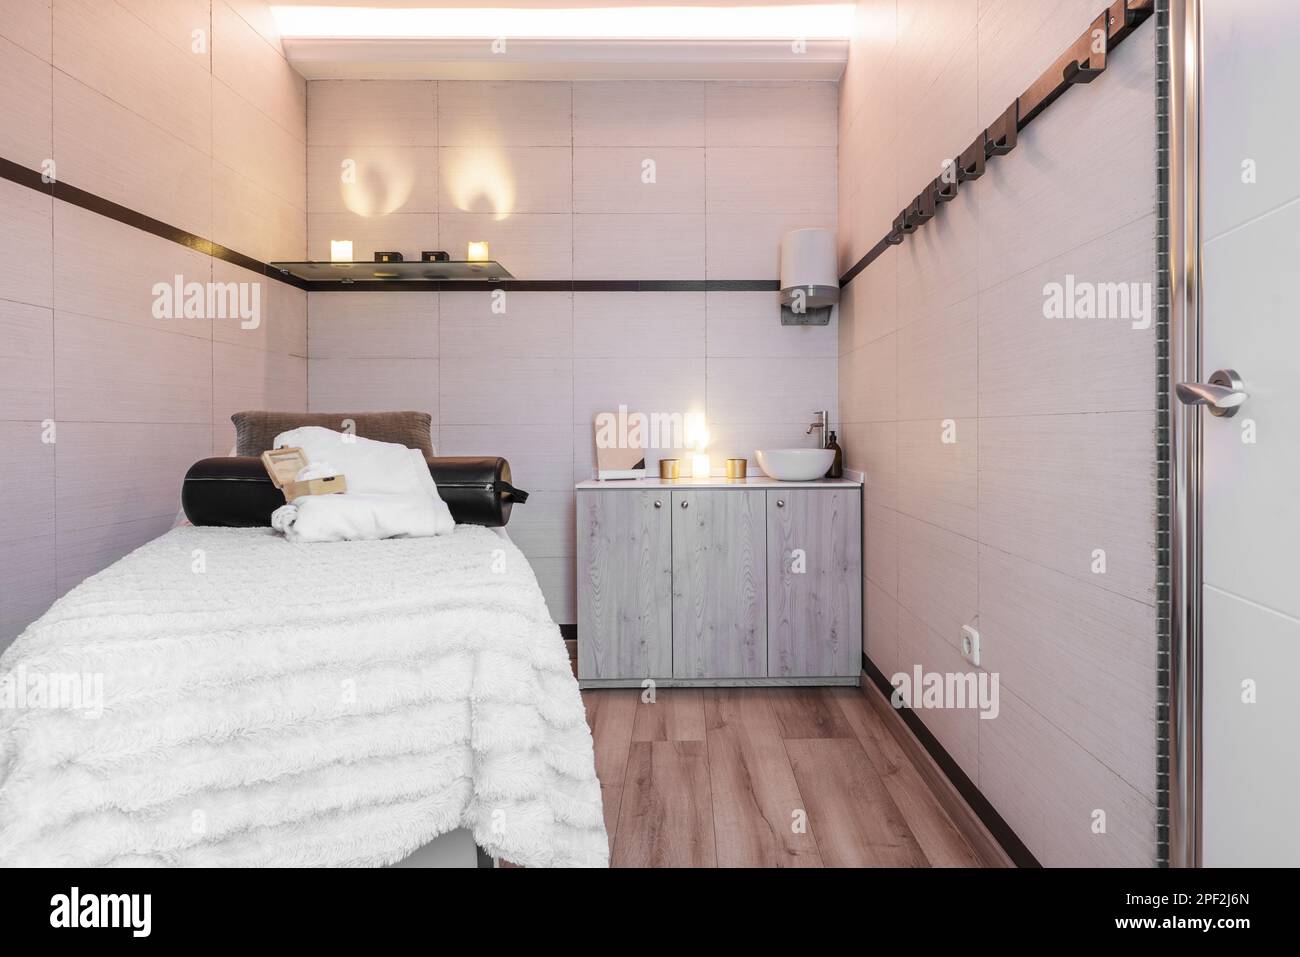 Cabin of a clinic for aesthetic treatments with a massage table, light bulbs similar to candles and a wooden sideboard Stock Photo